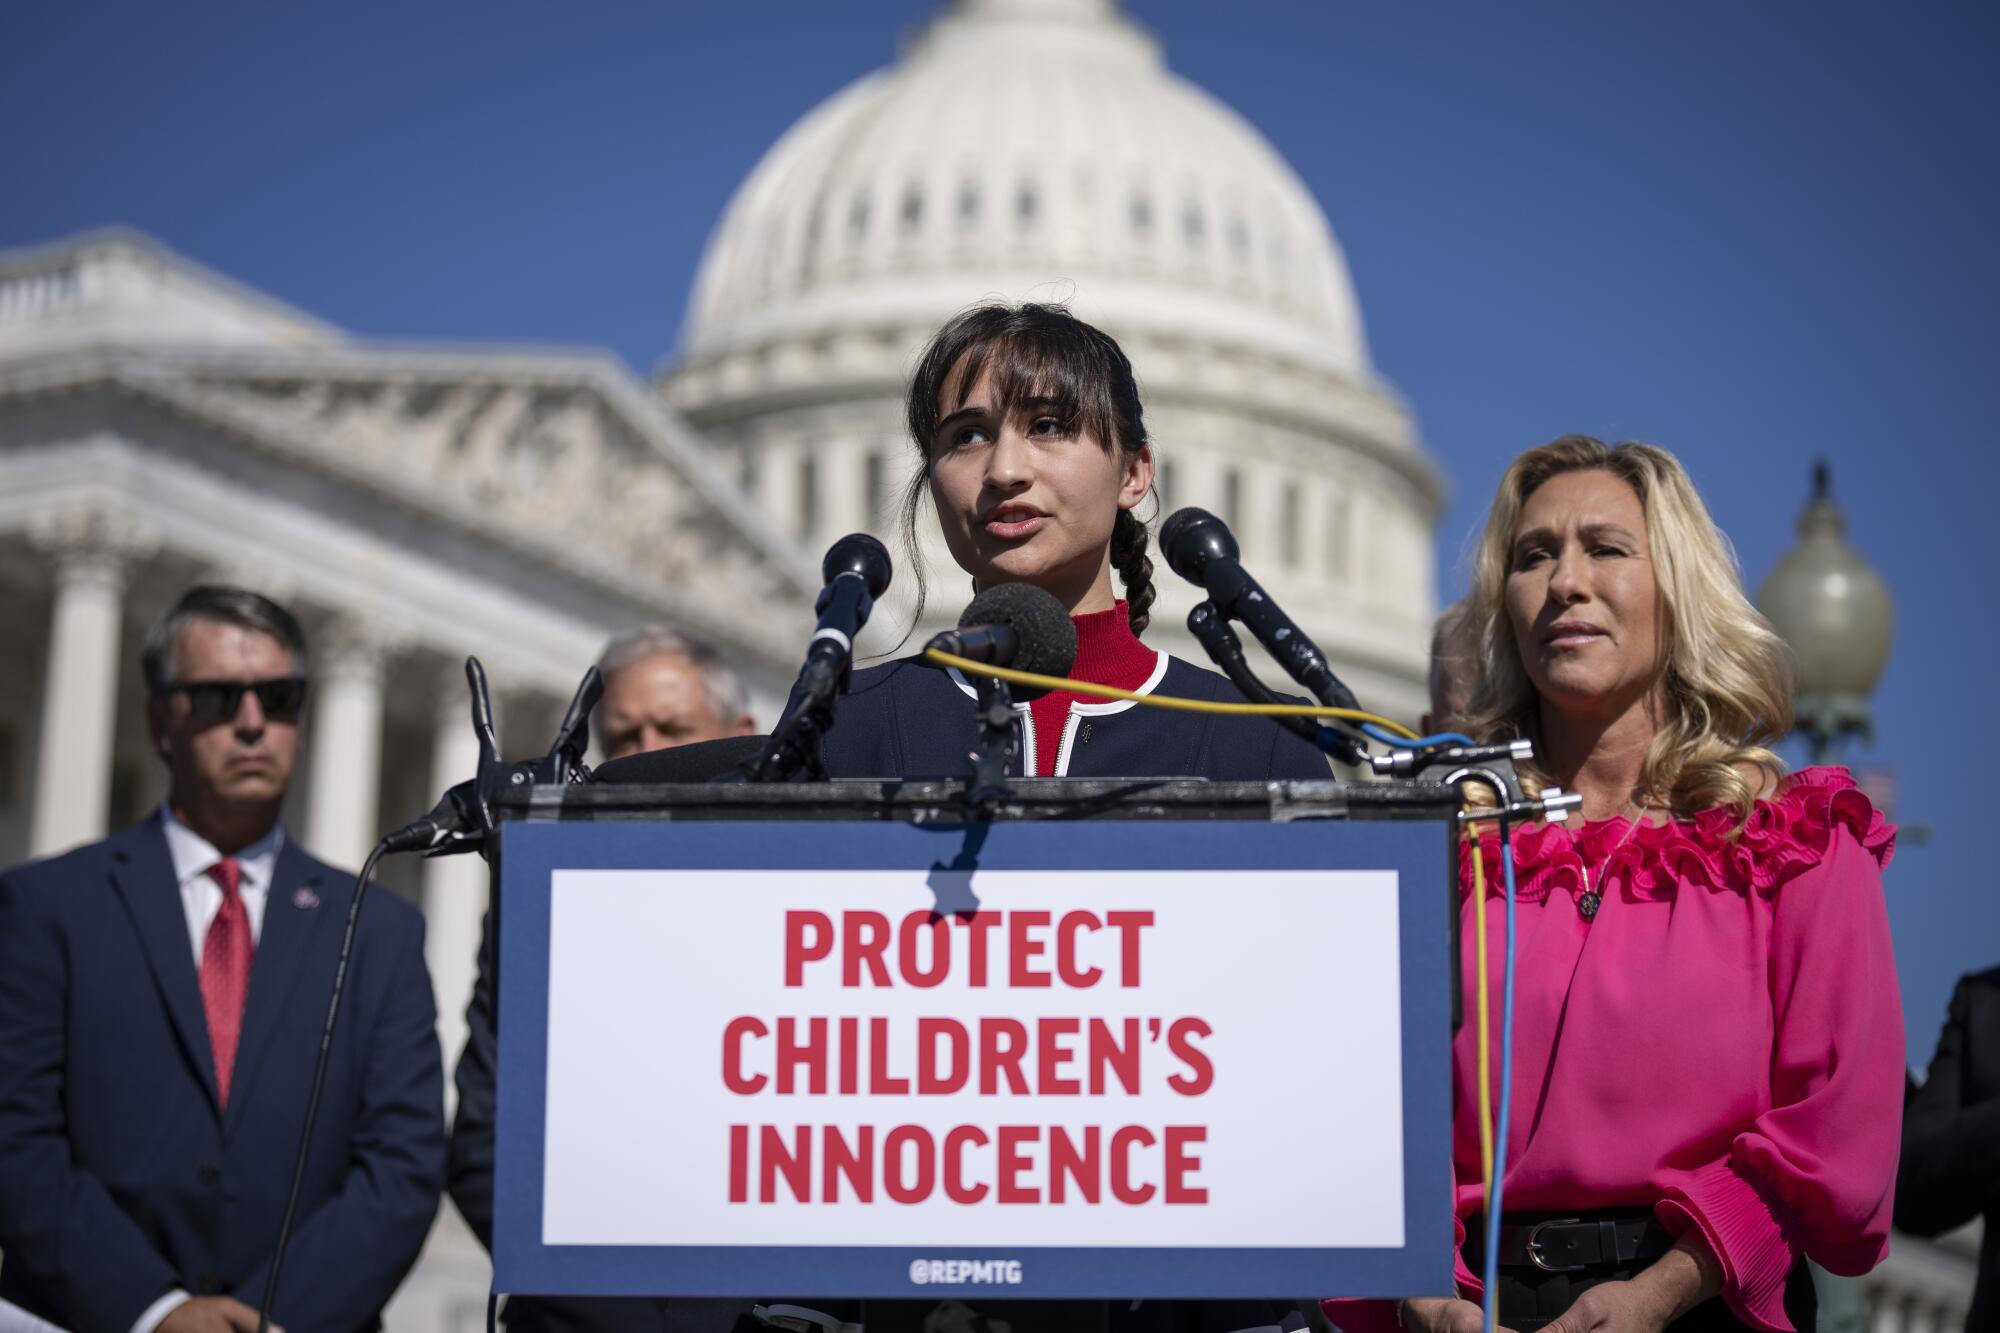 Chloe Cole speaks before a sign that says, "Protect Children's Innocence," outside the U.S. Capitol